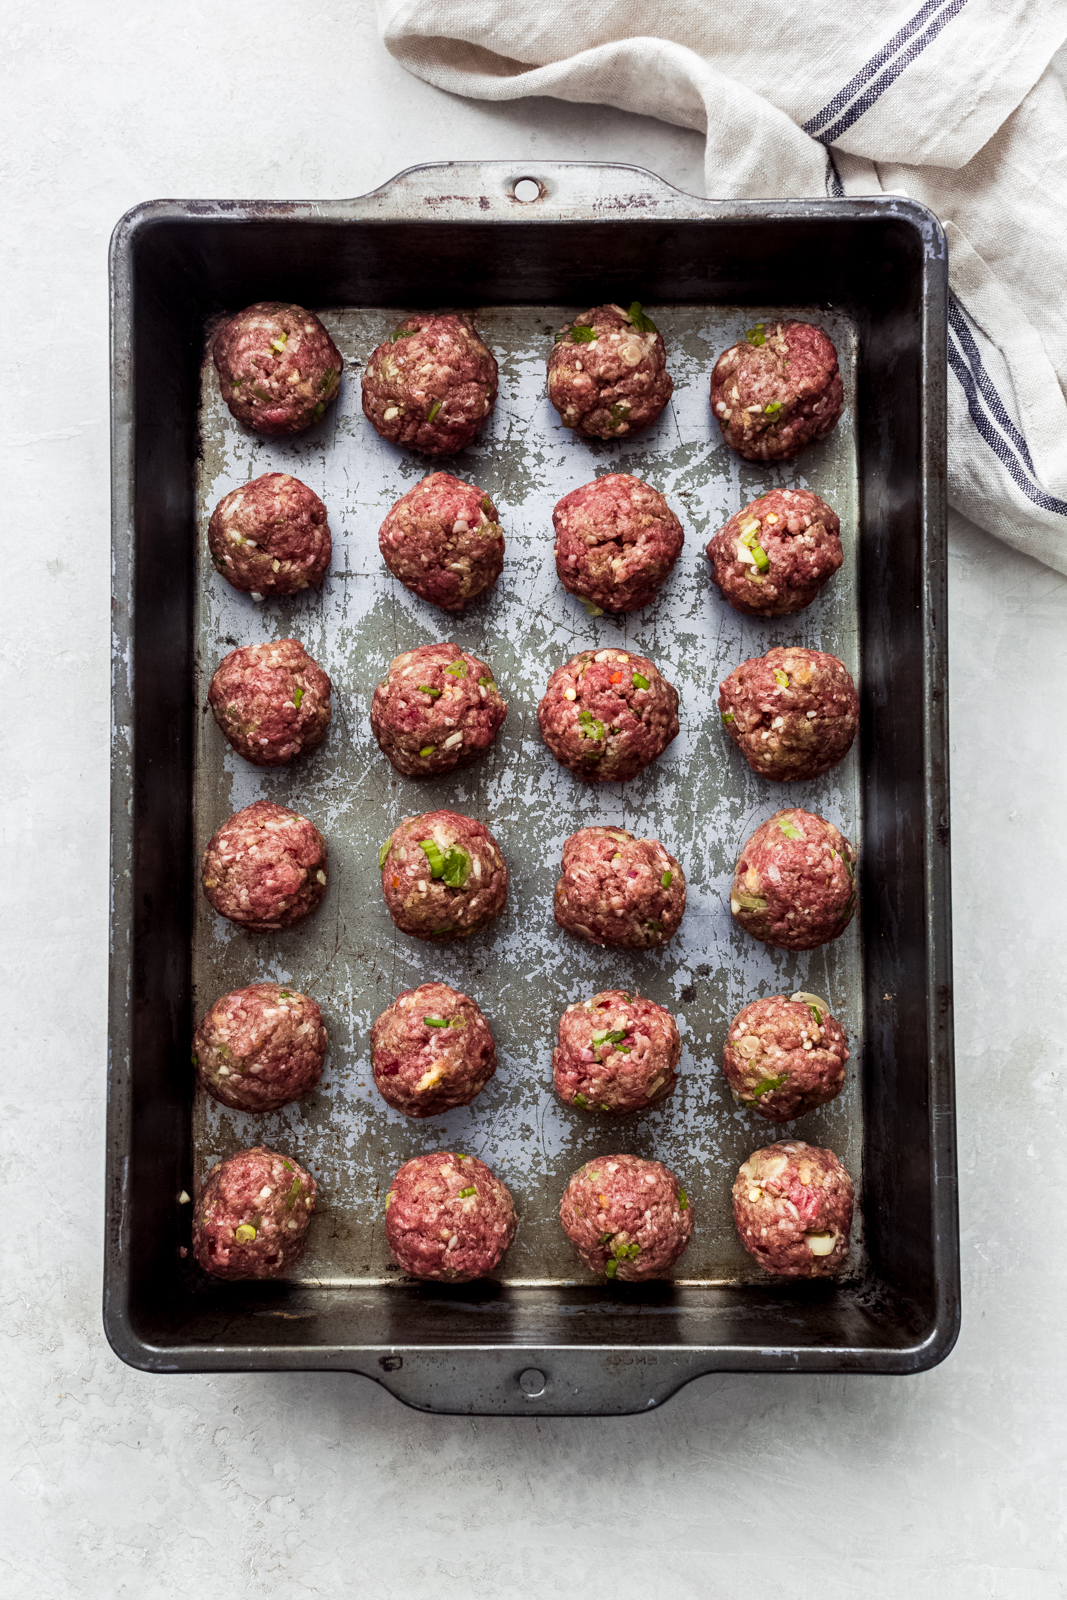 prepared meatballs on a baking dish ready to bake